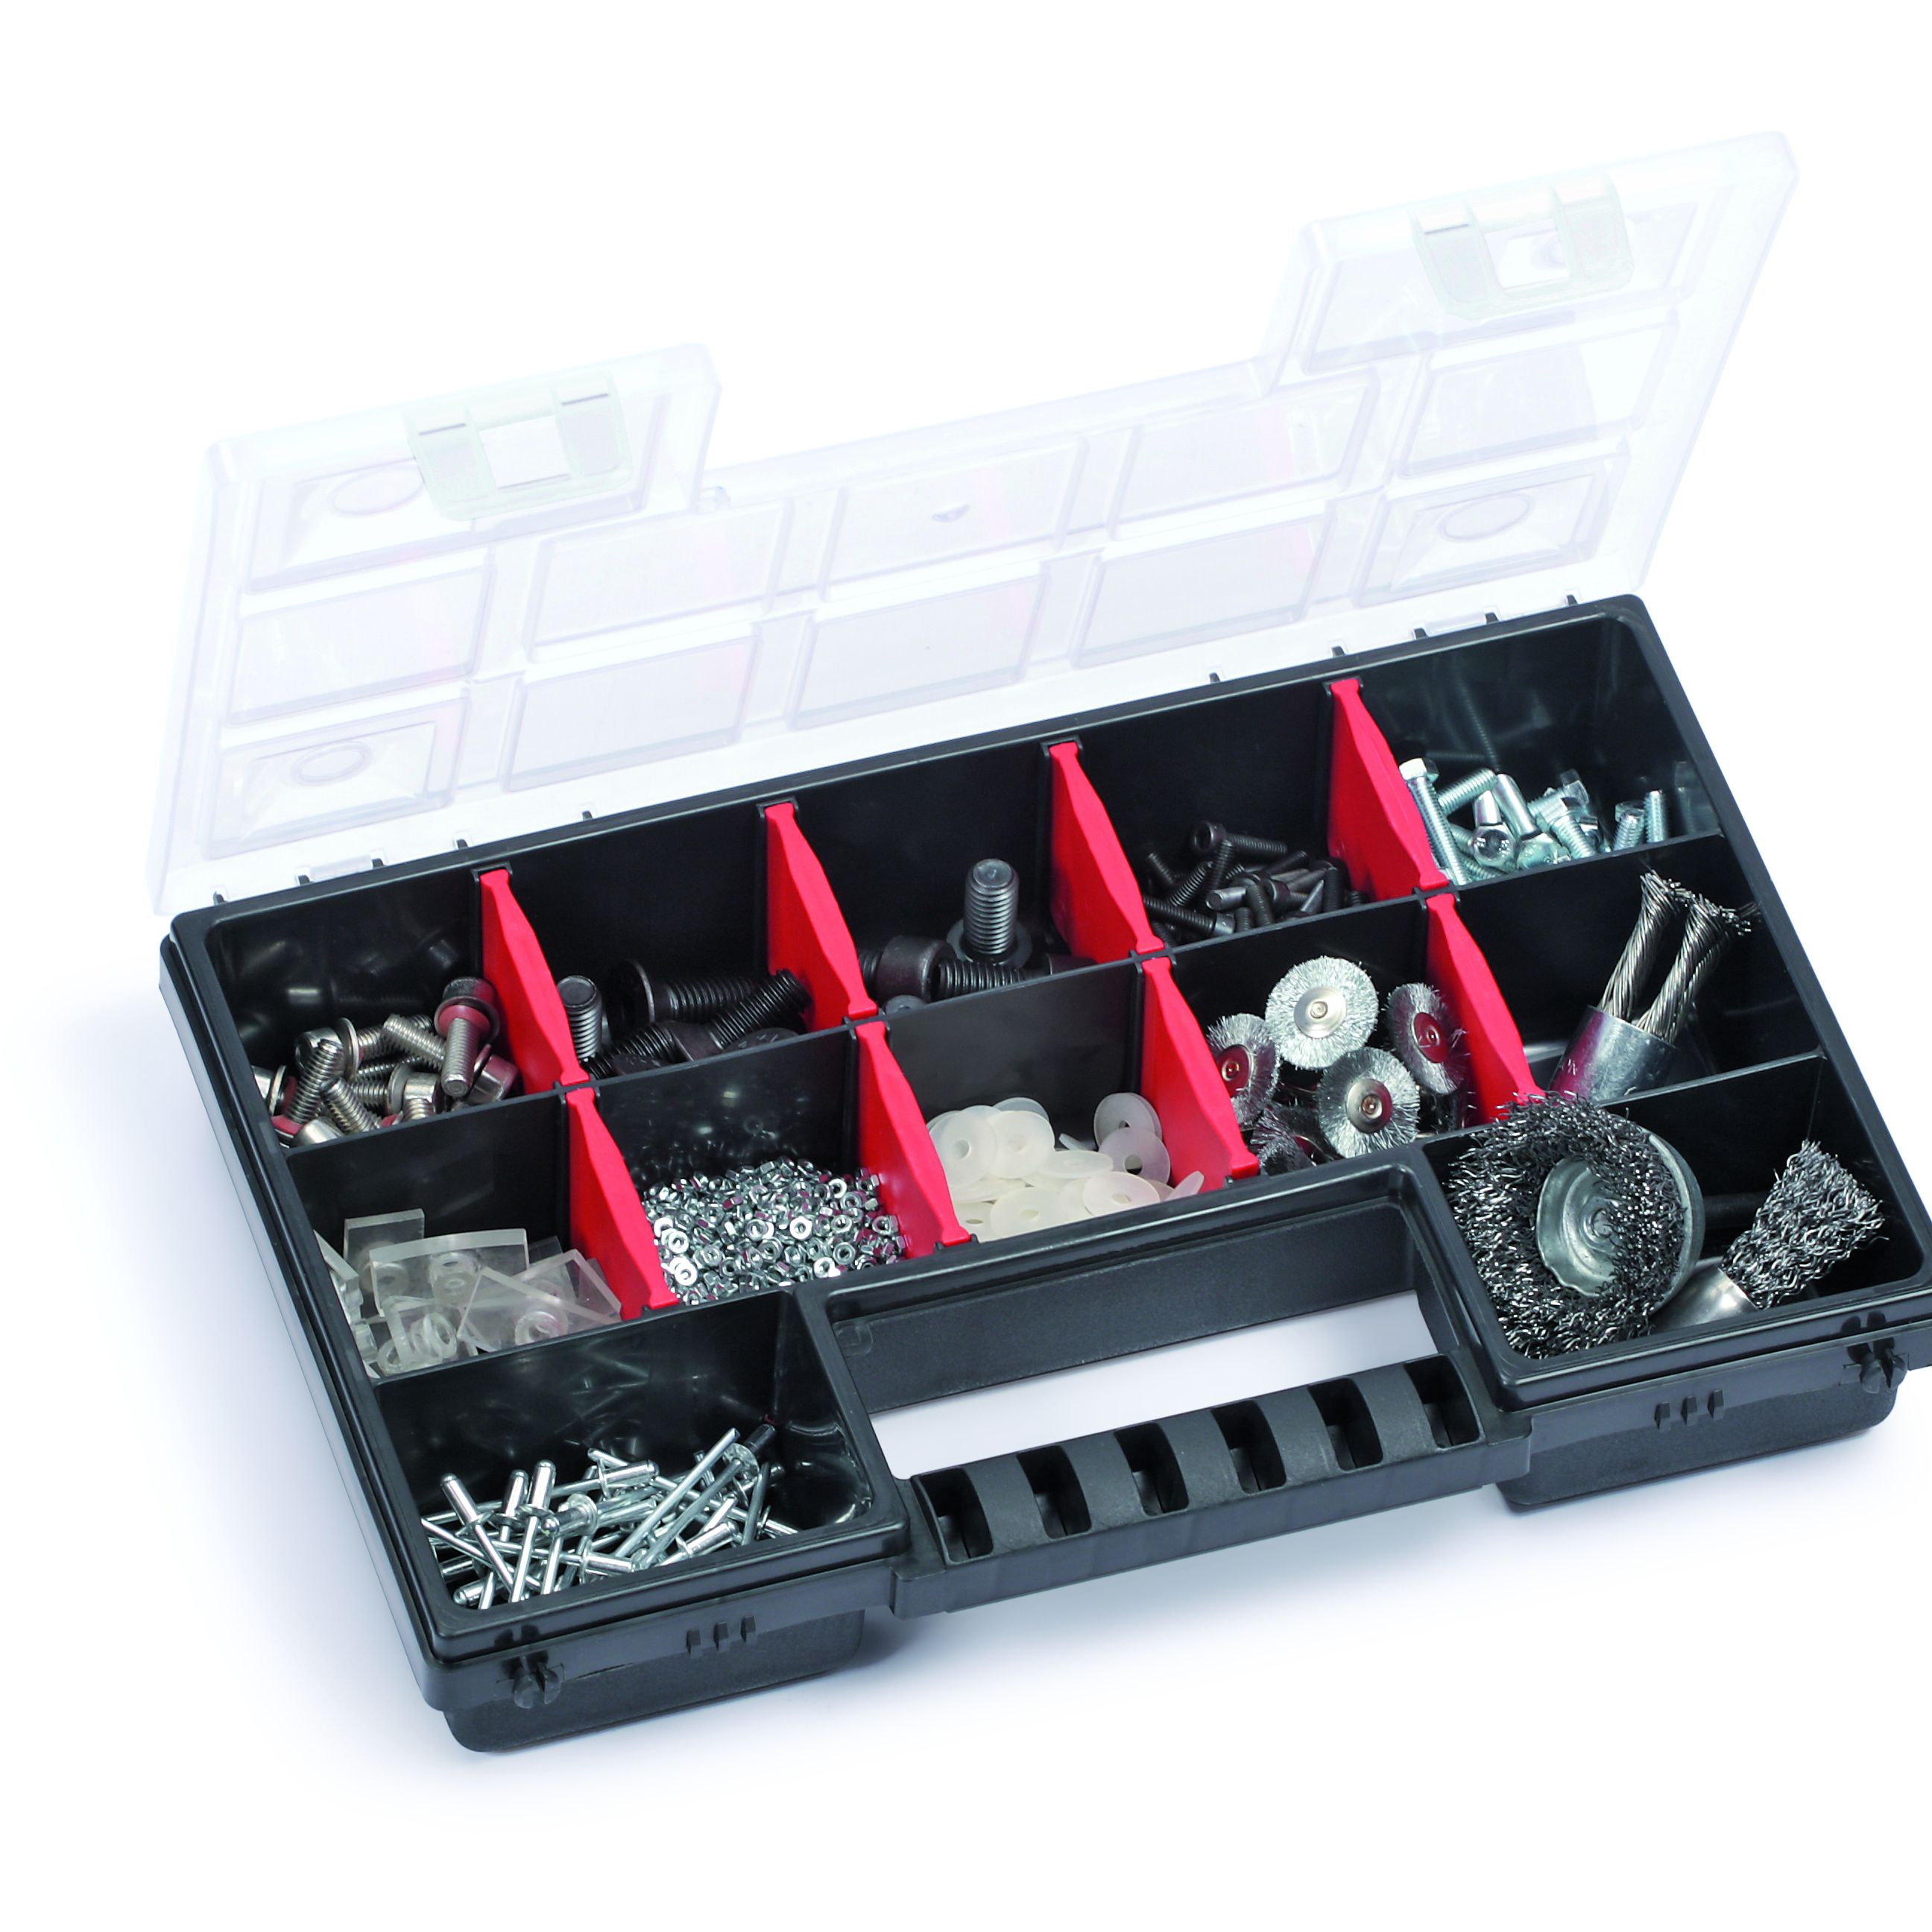 Performance Power Black Organiser with 12 compartment